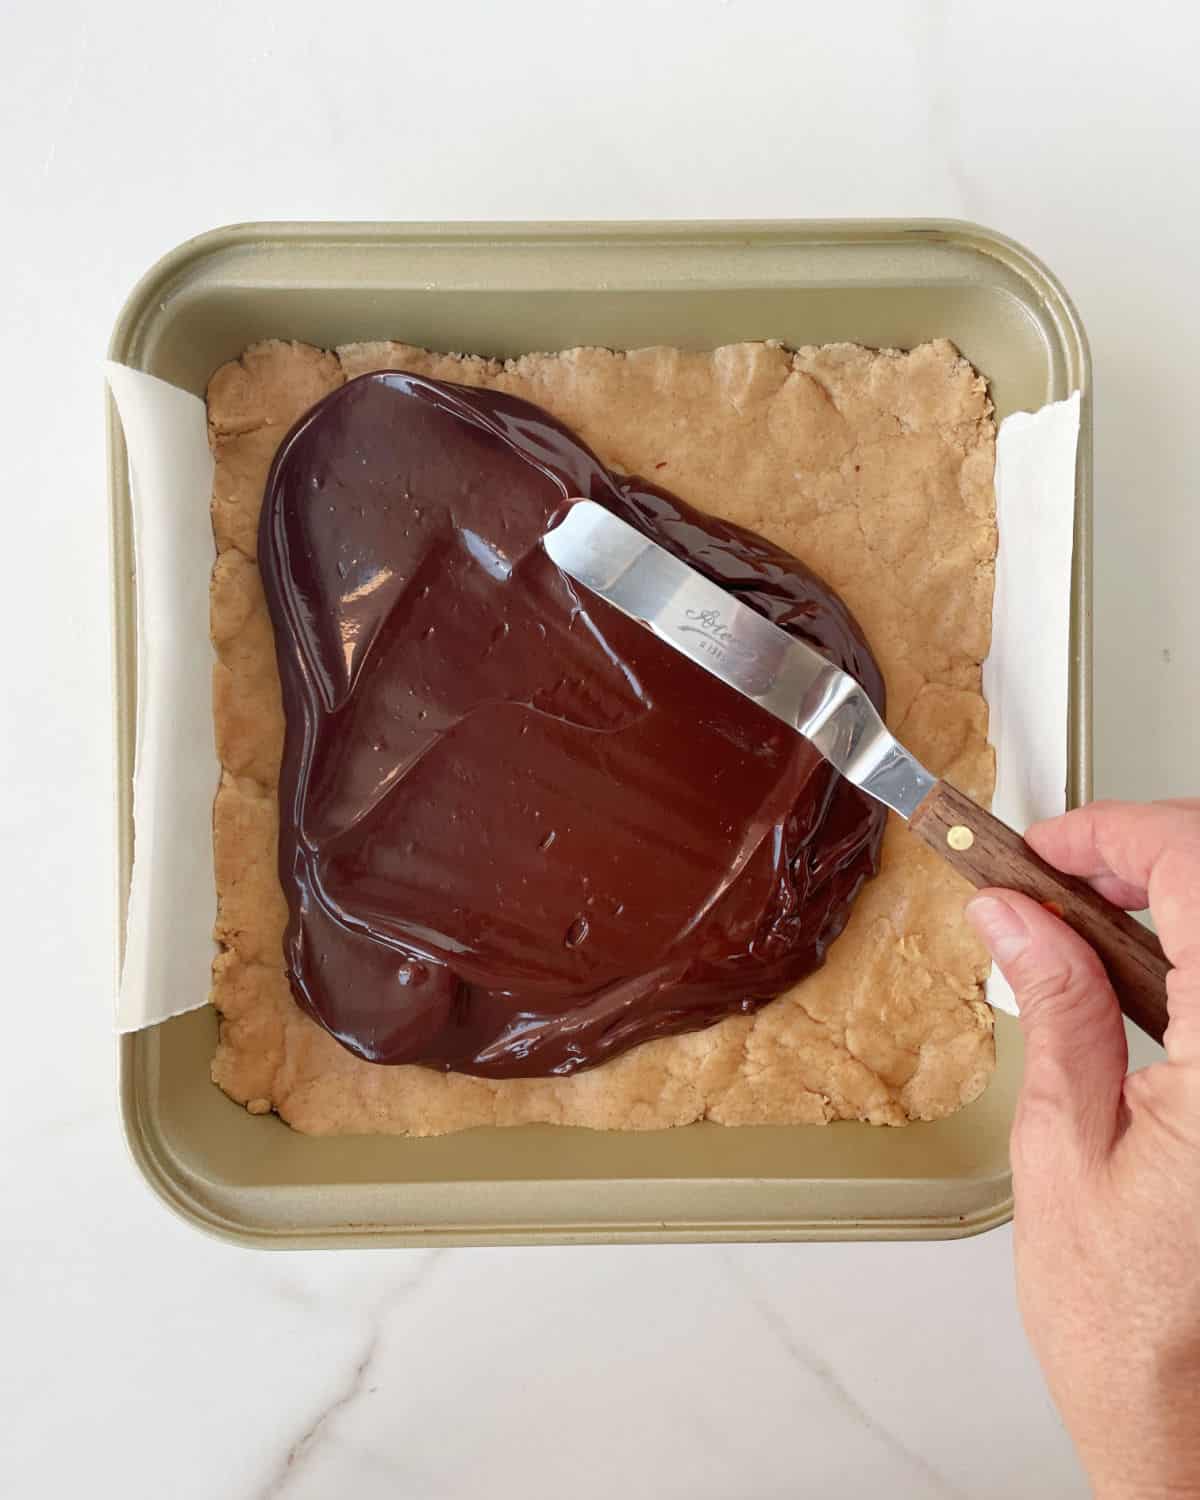 Spreading chocolate ganache with a spatula over peanut butter fudge layer in a square pan. White surface.